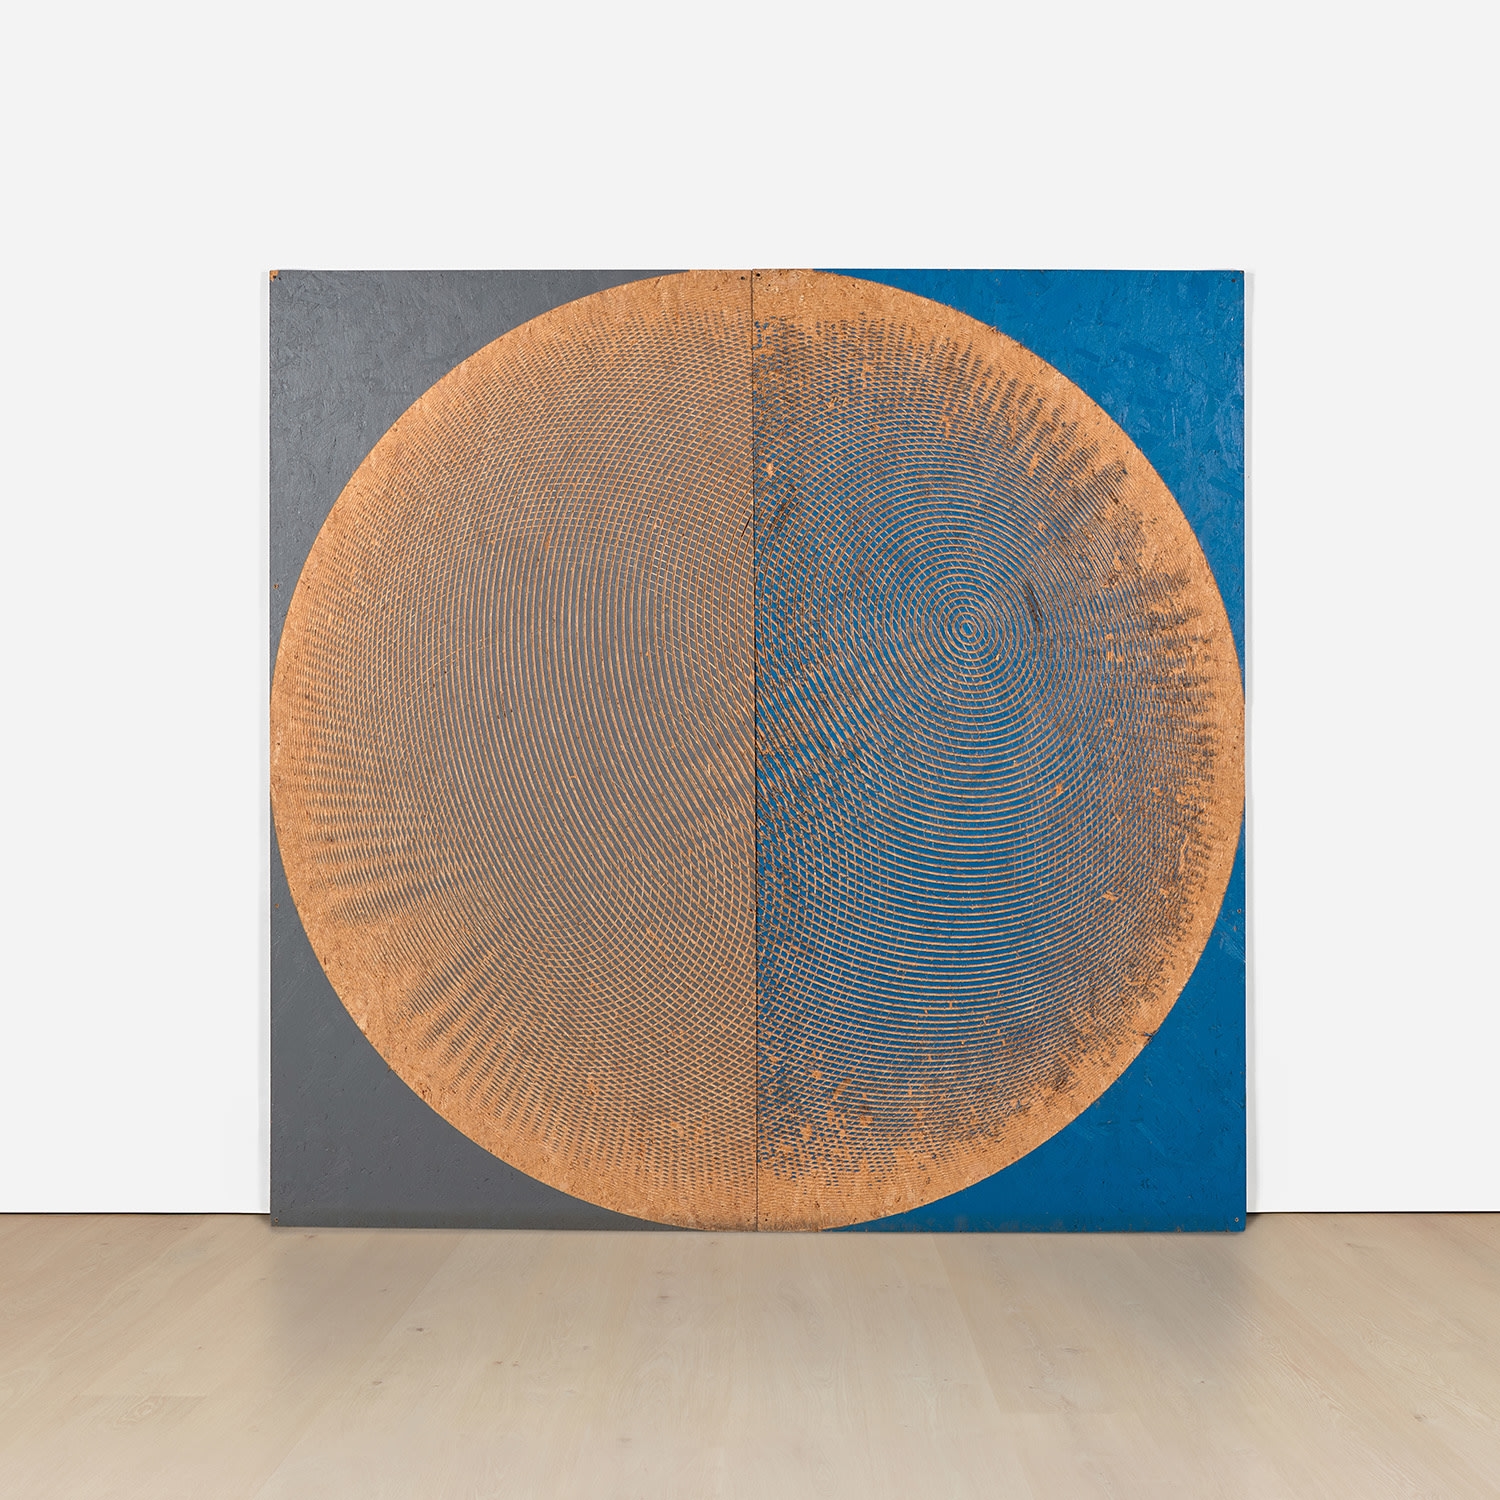 Artwork by Michael DeLucia, Sphere (Grey, Blue), Made of construction enamel on OSB, in 2 parts